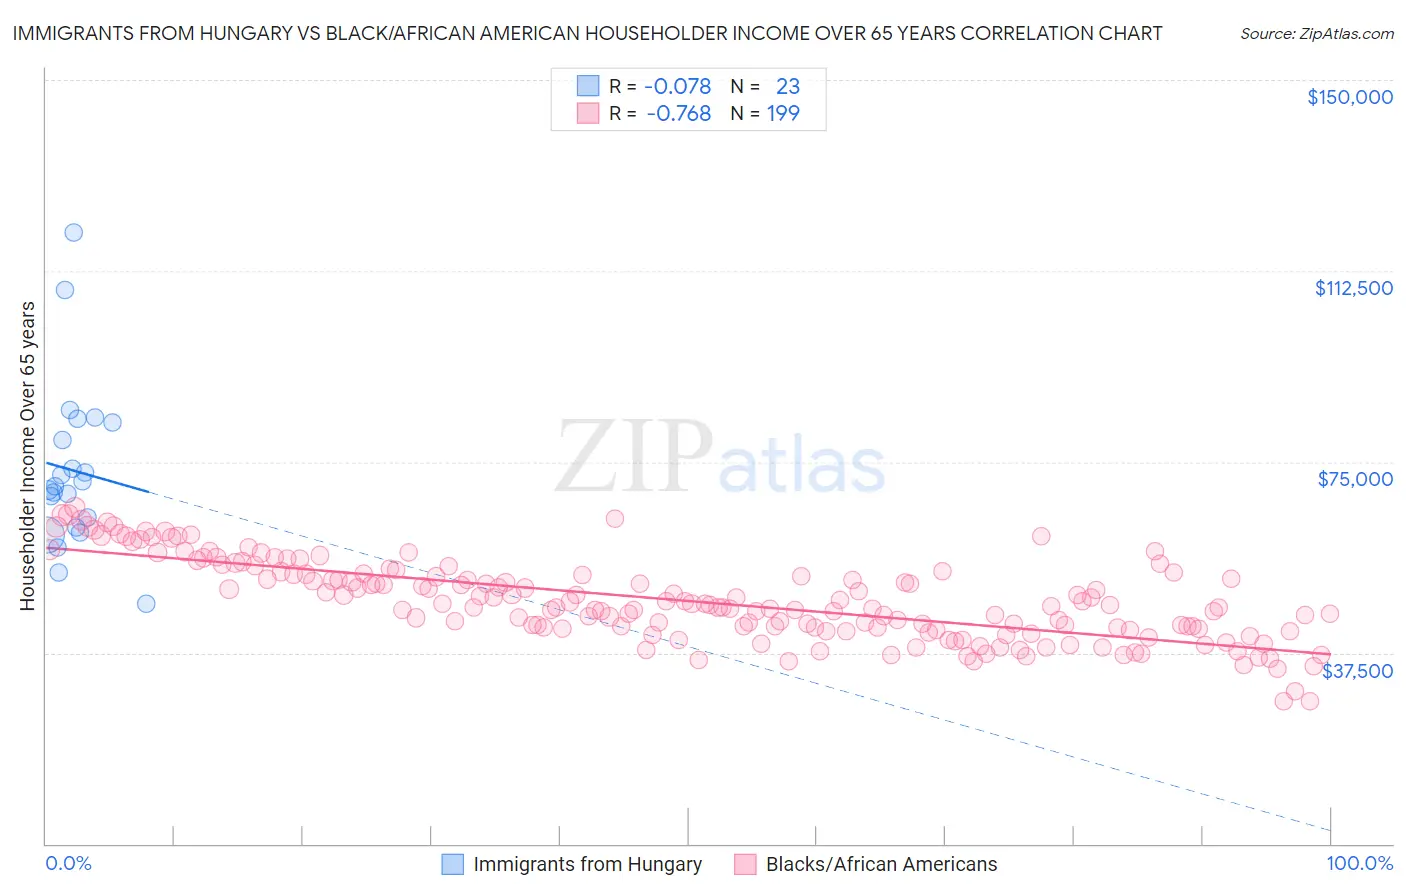 Immigrants from Hungary vs Black/African American Householder Income Over 65 years